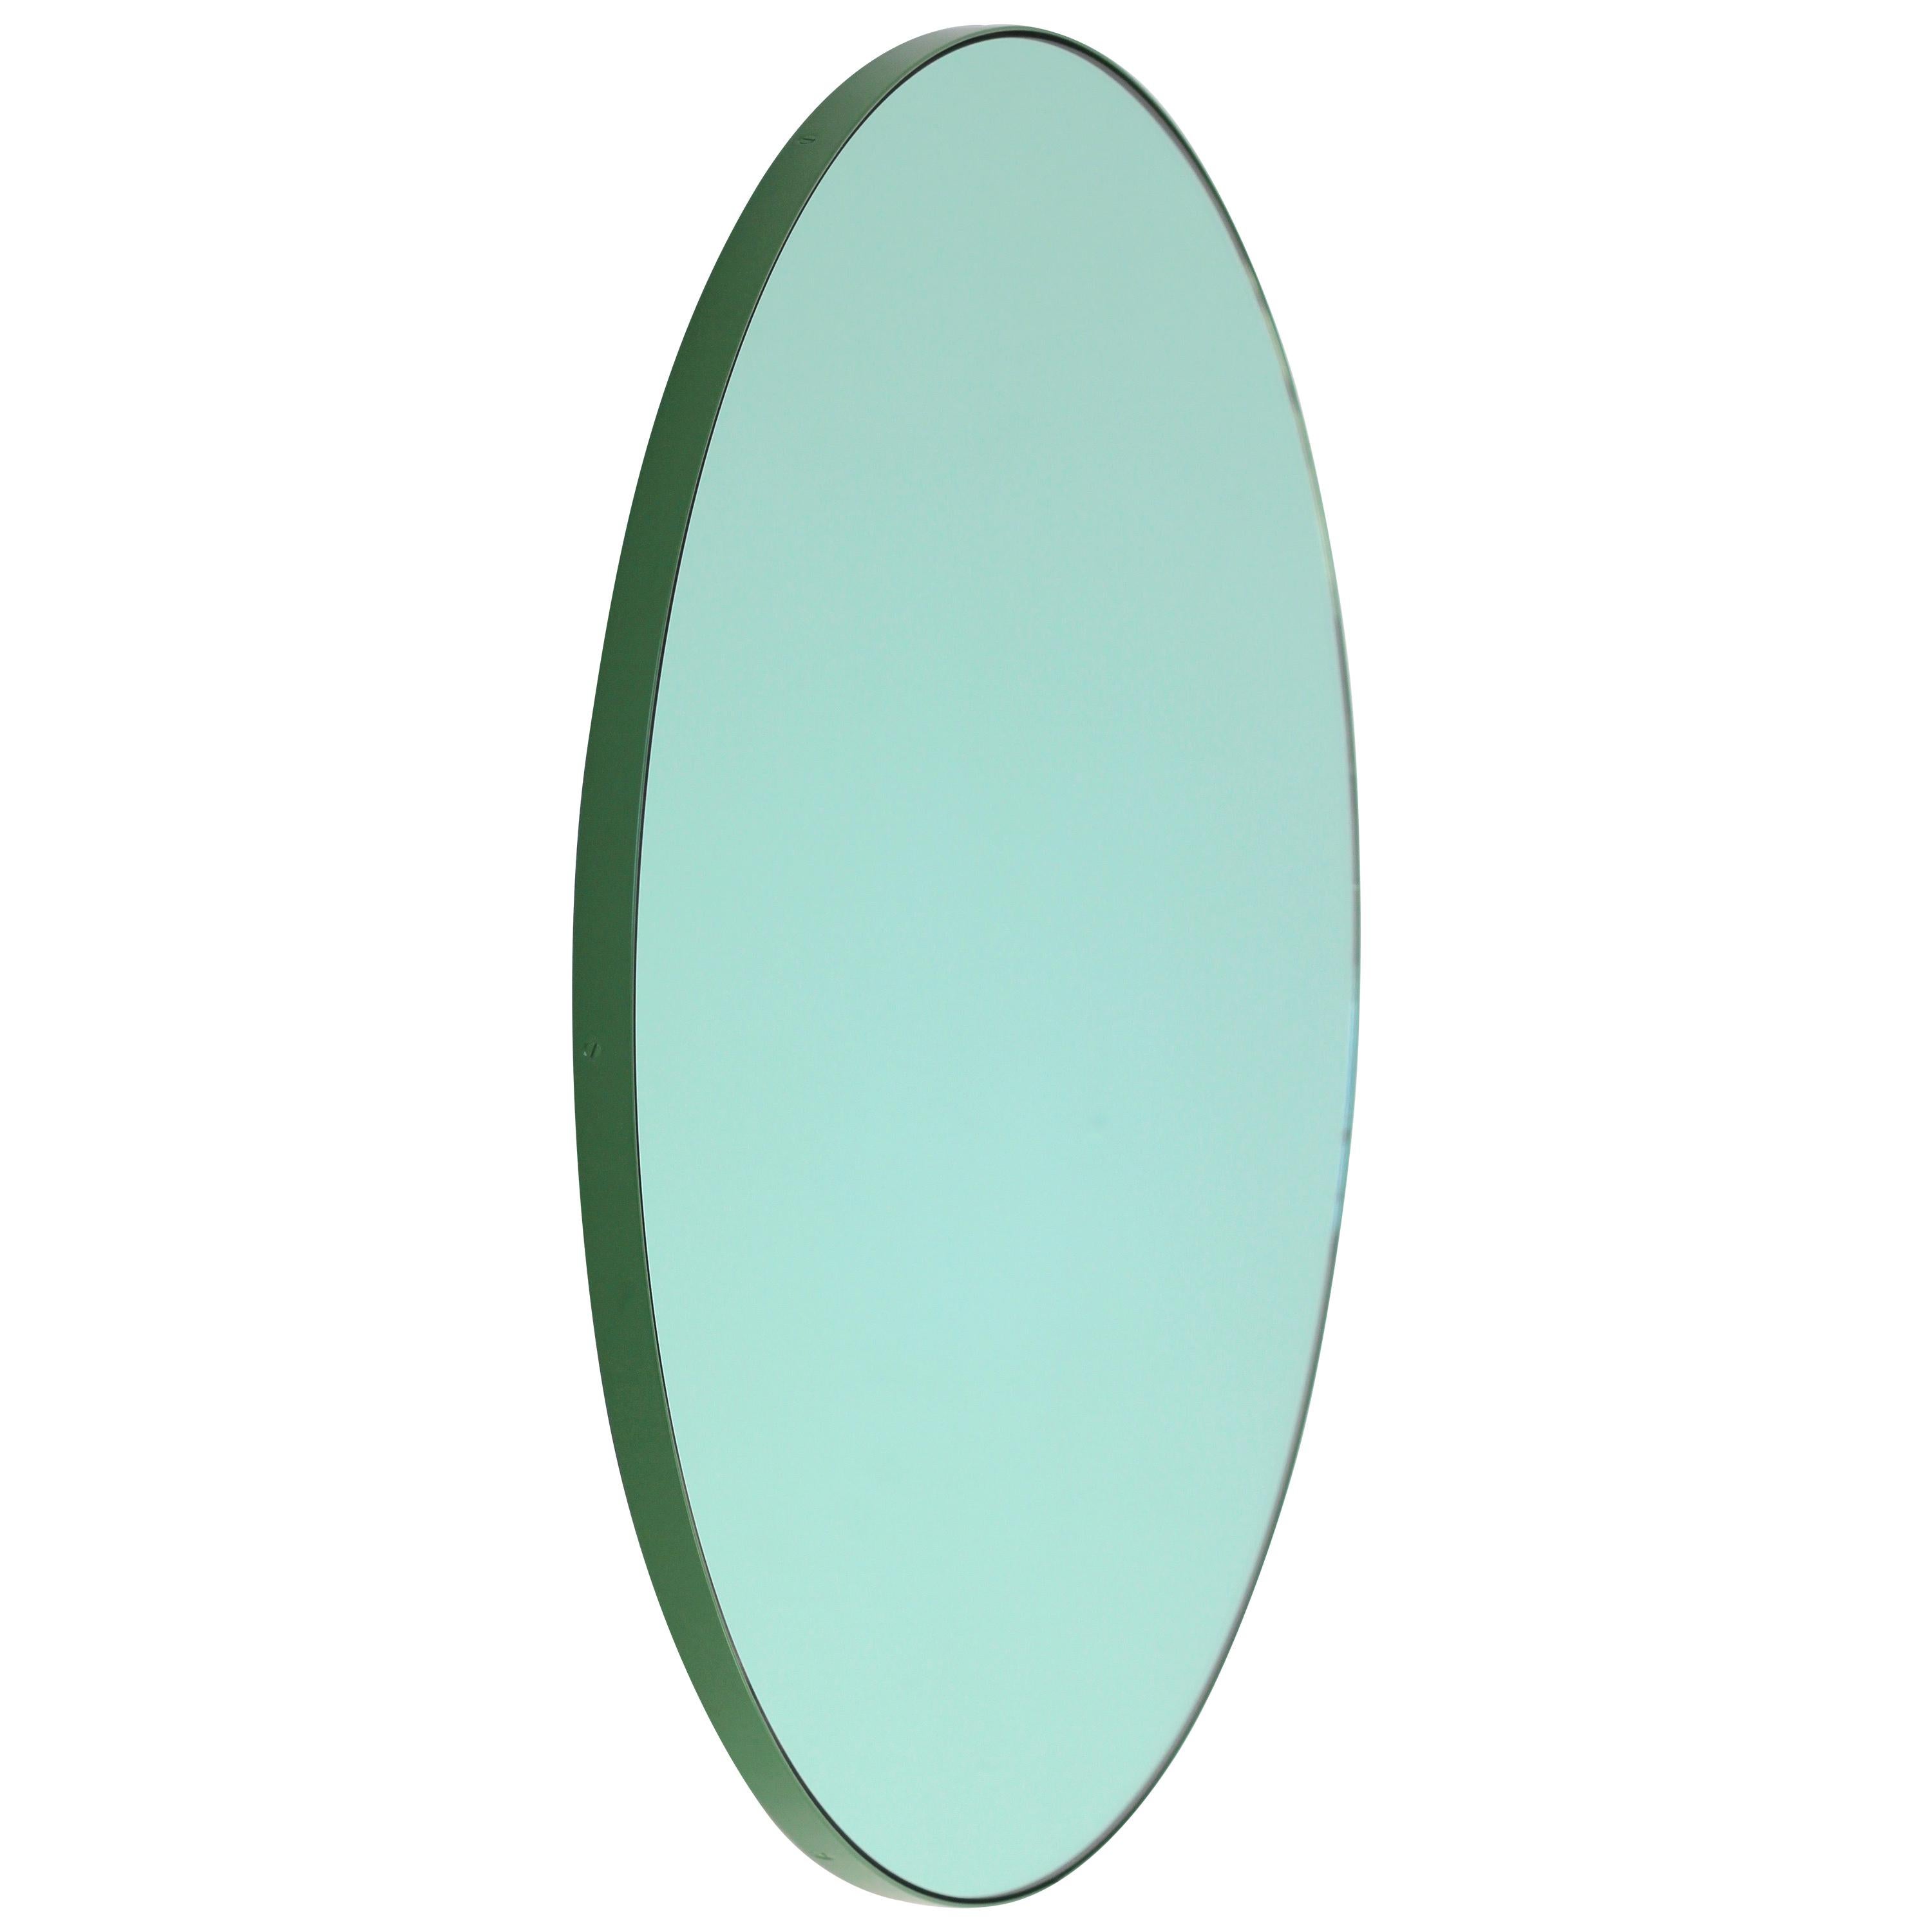 Orbis Green Tinted Modern Round Mirror with Green Frame, Small